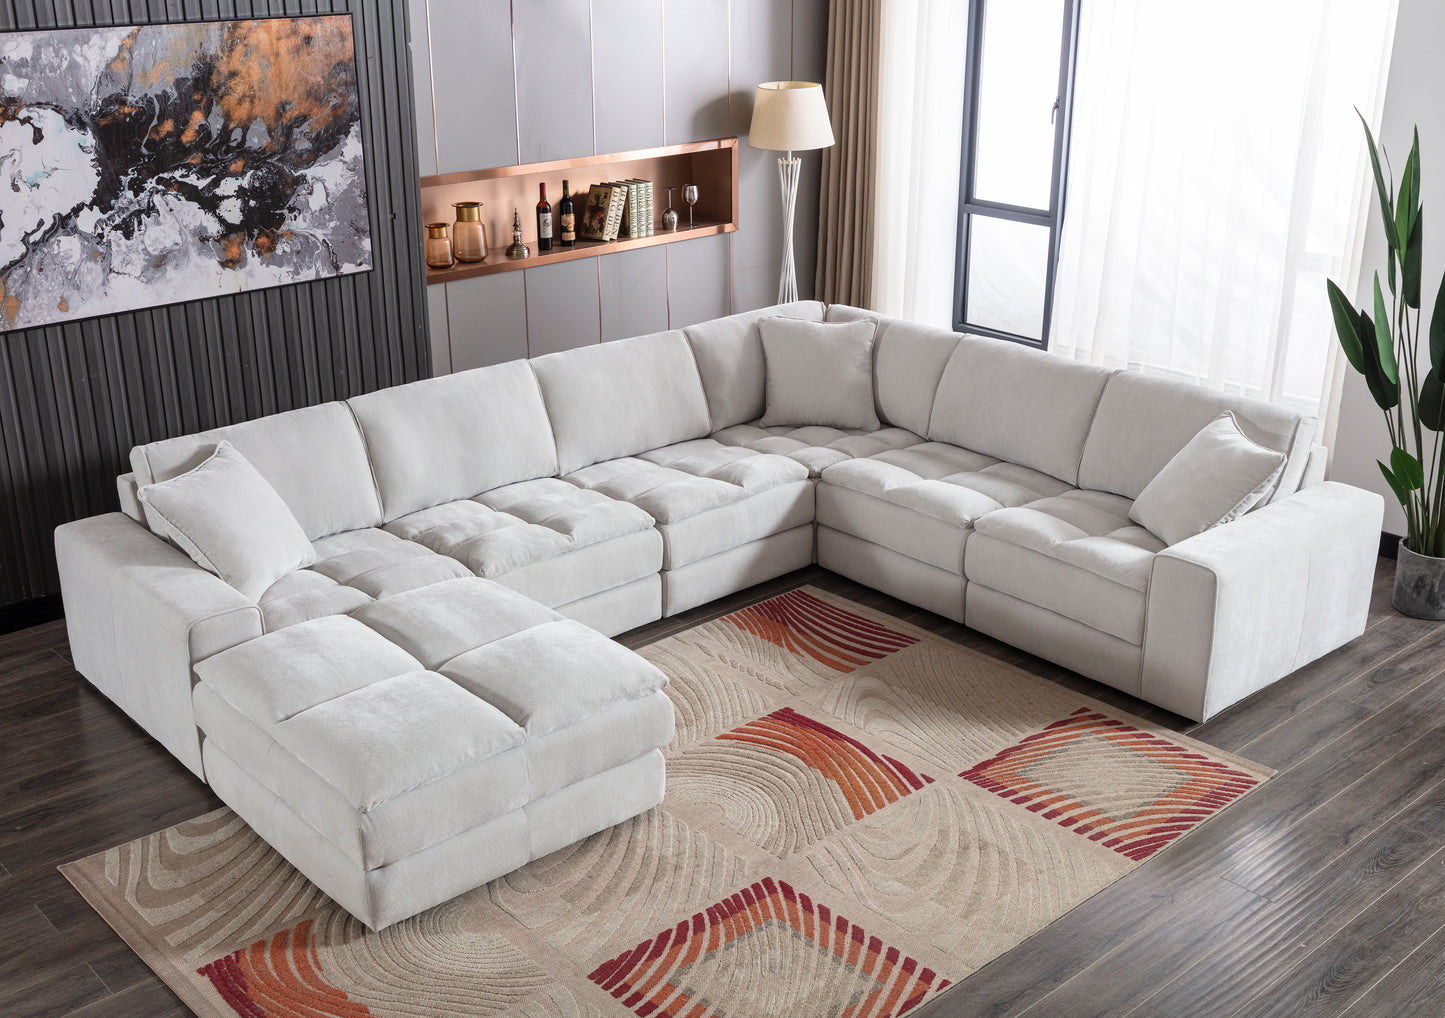 Breton Contemporary Fabric Tufted Modular Sectional Sofa with Ottoman, Oyster